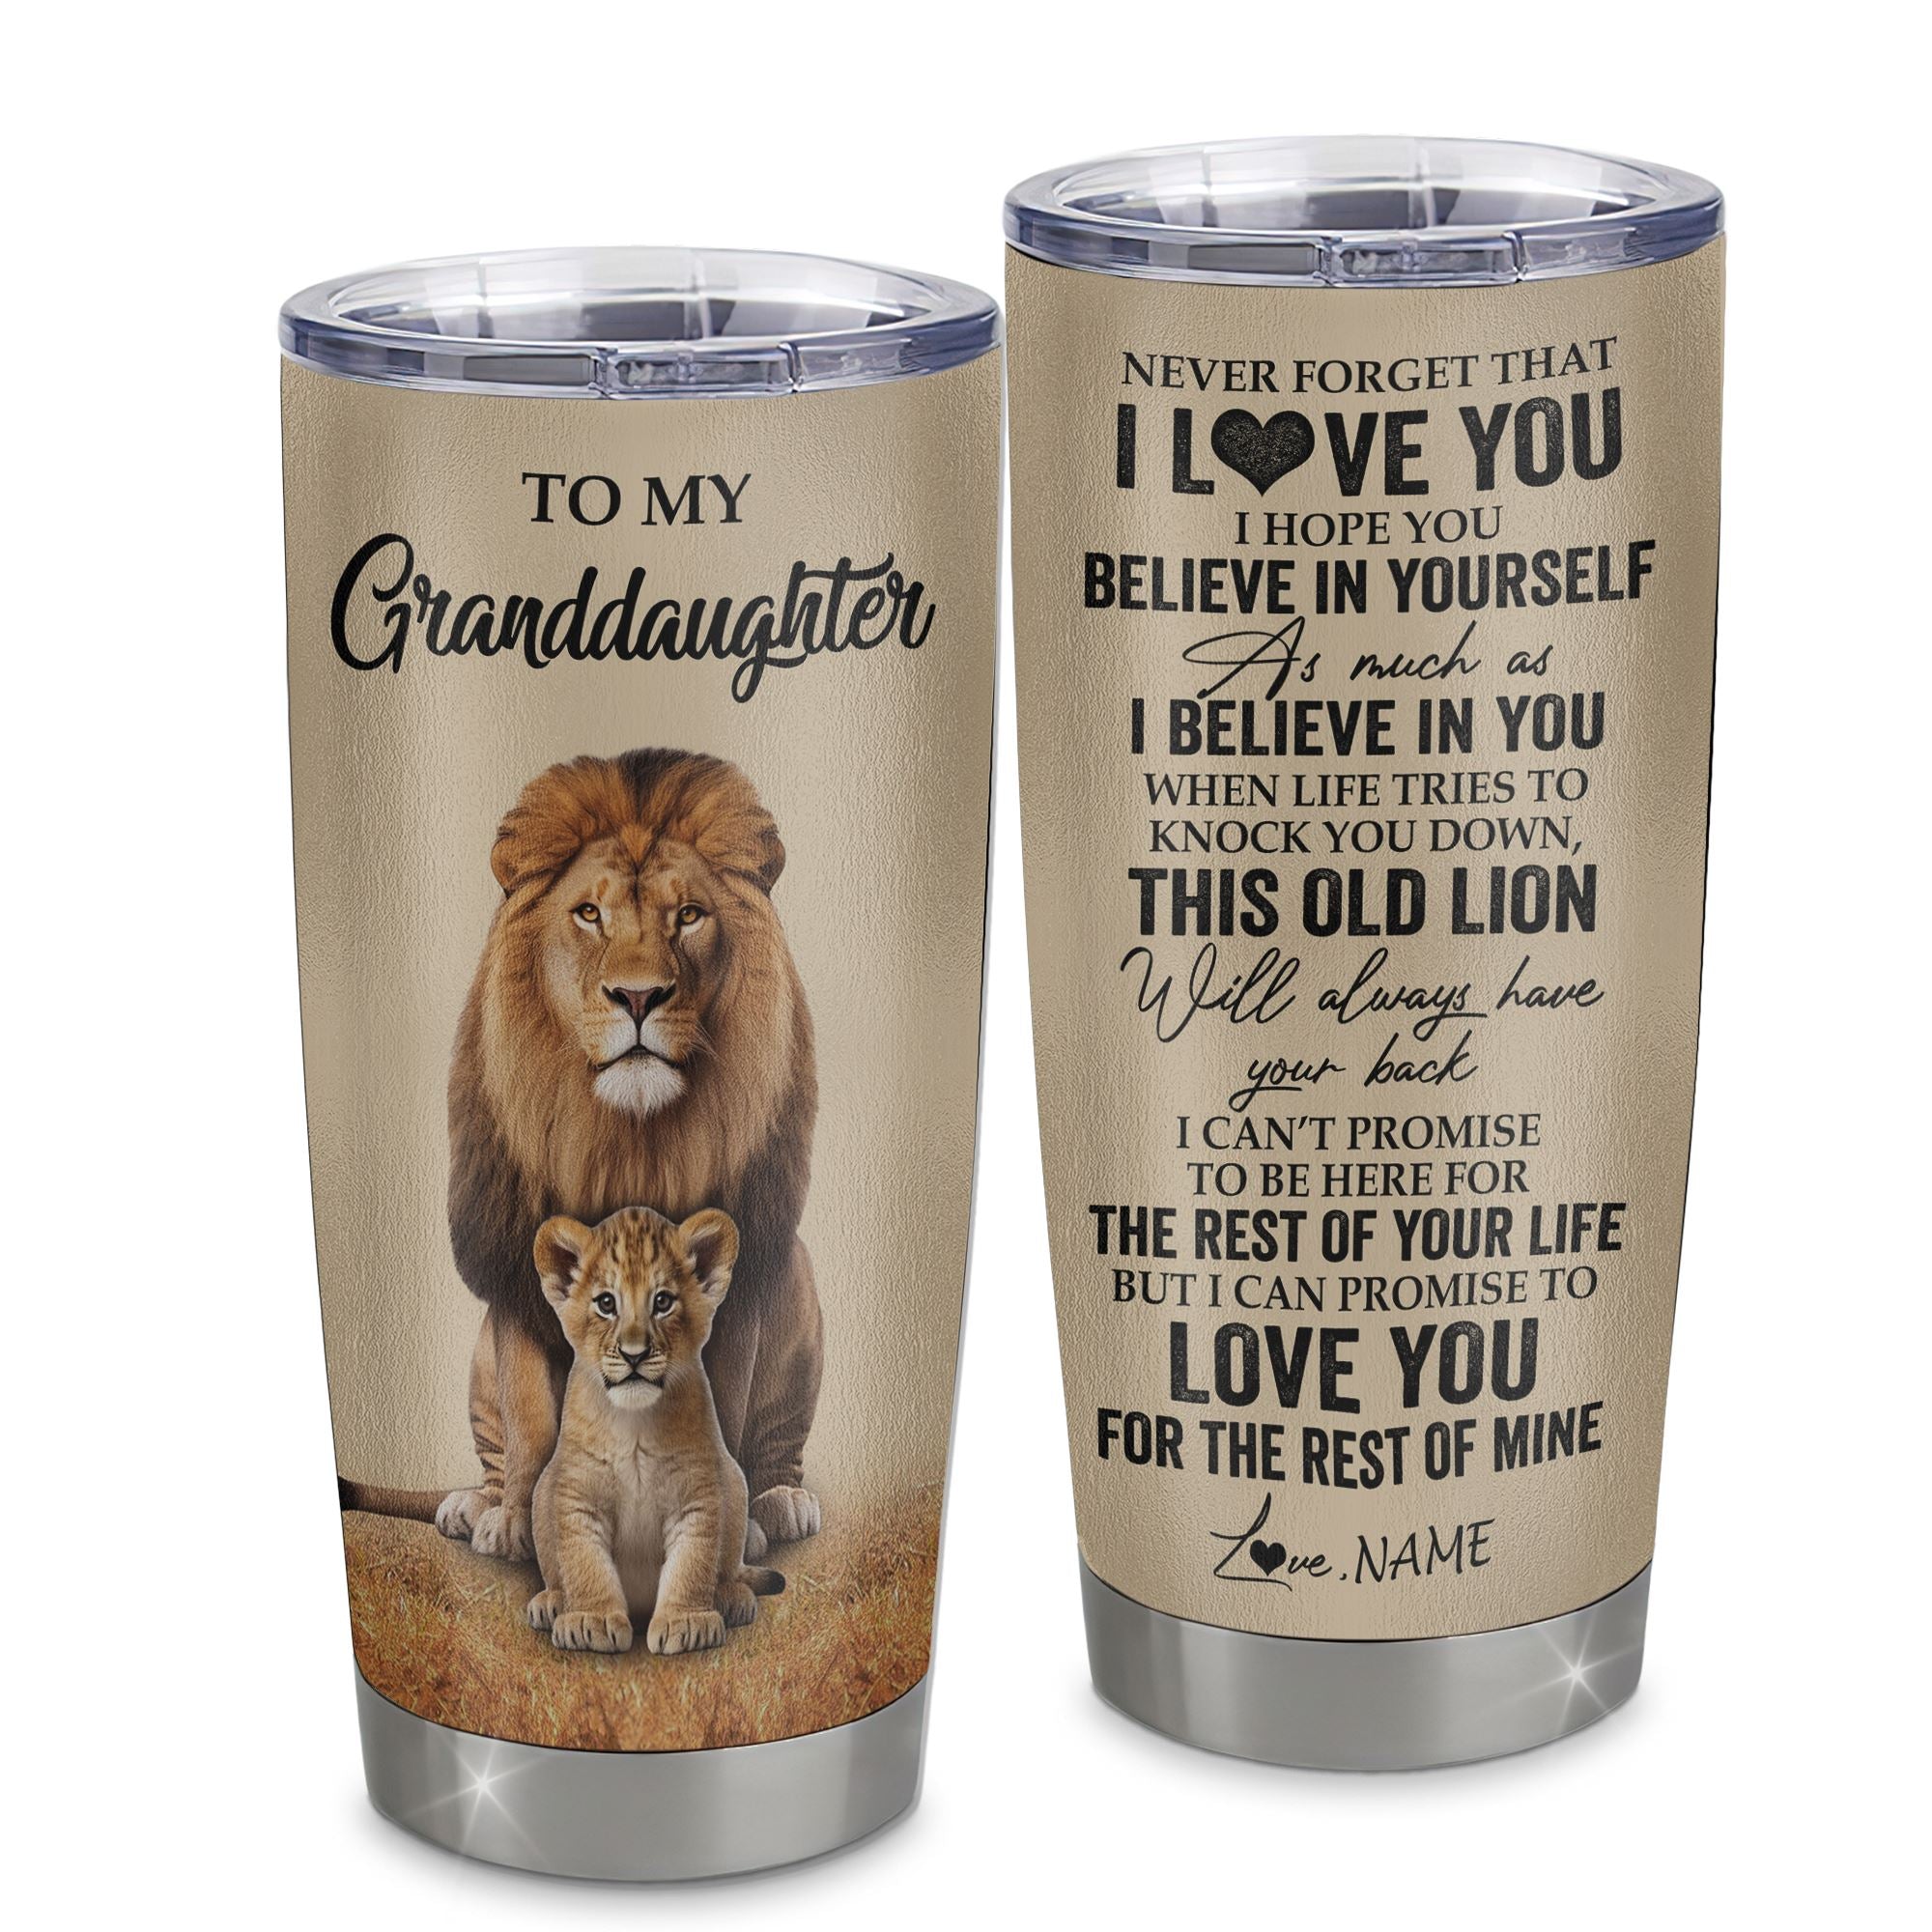 Personalized_To_My_Granddaughter_Tumbler_From_Grandpa_Papa_Lion_Stainless_Steel_Cup_Never_Forget_That_I_Love_You_Granddaughter_Birthday_Gifts_Christmas_Custom_Travel_Mug_Tumbler_mocku-1.jpg